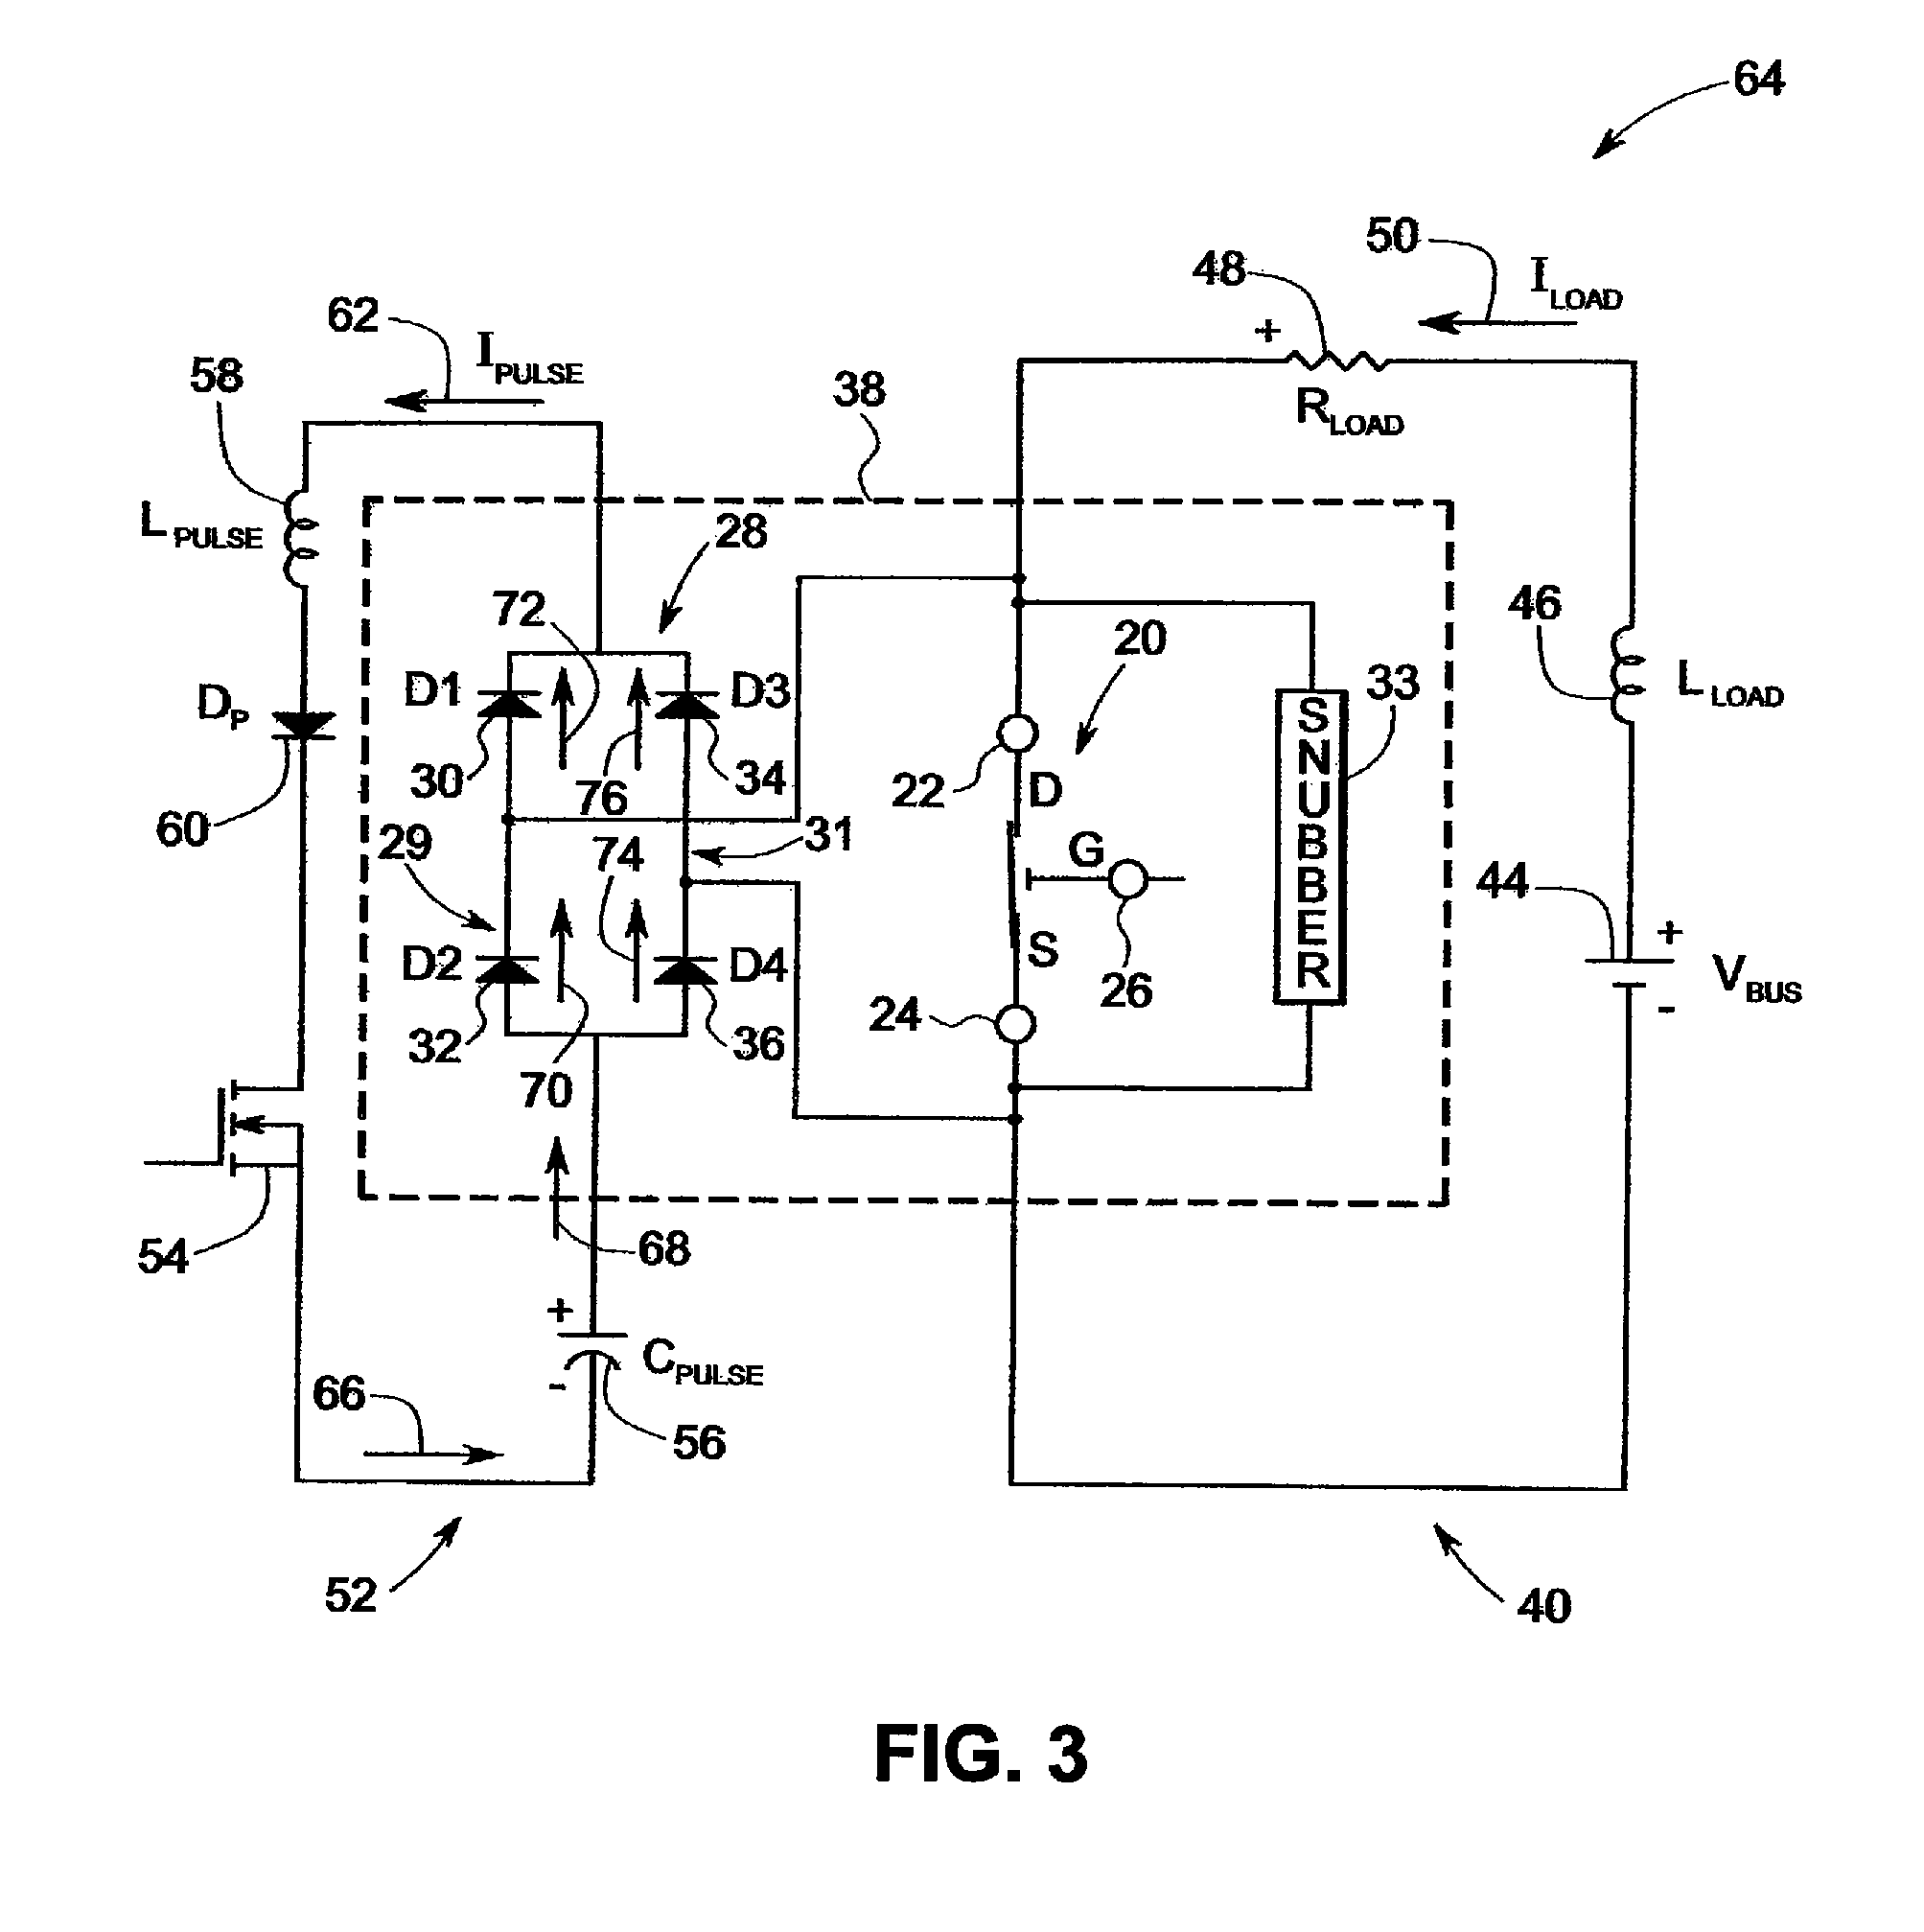 Micro-electromechanical system based arc-less switching with circuitry for absorbing electrical energy during a fault condition